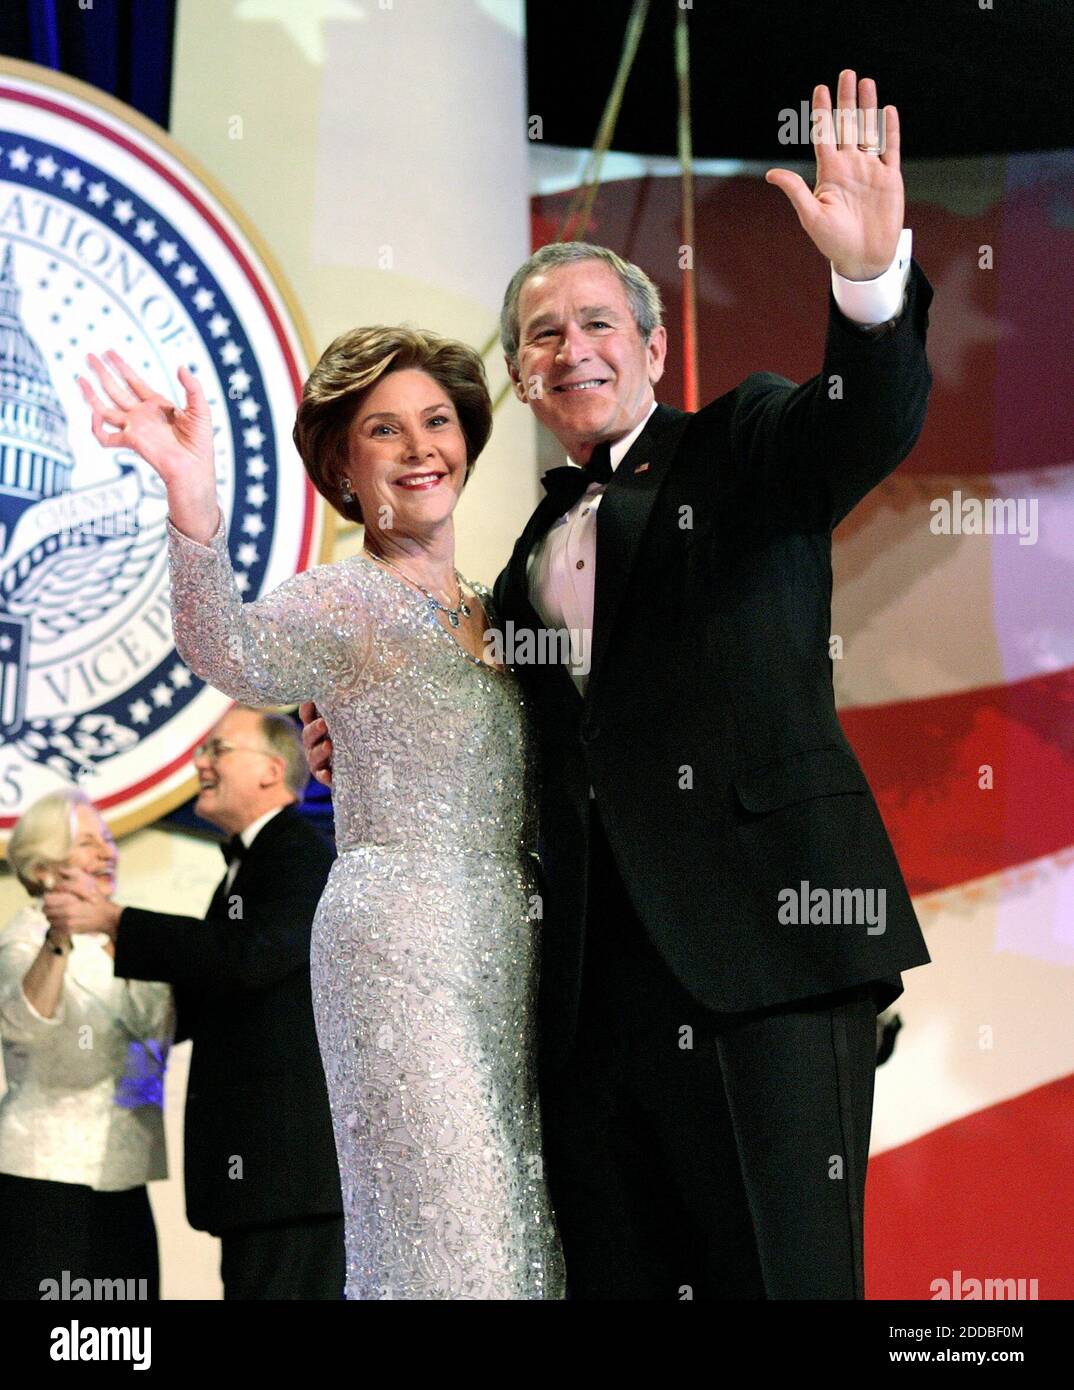 NO FILM, NO VIDEO, NO TV, NO DOCUMENTARY - President George W. Bush and first lady Laura Bush dance at the Independence Ball, part of the inauguration festivities in Washington, DC, USA, on January 20, 2005. Photo by Chuck Kennedy/US News Story Slugged/KRT/ABACA. Stock Photo